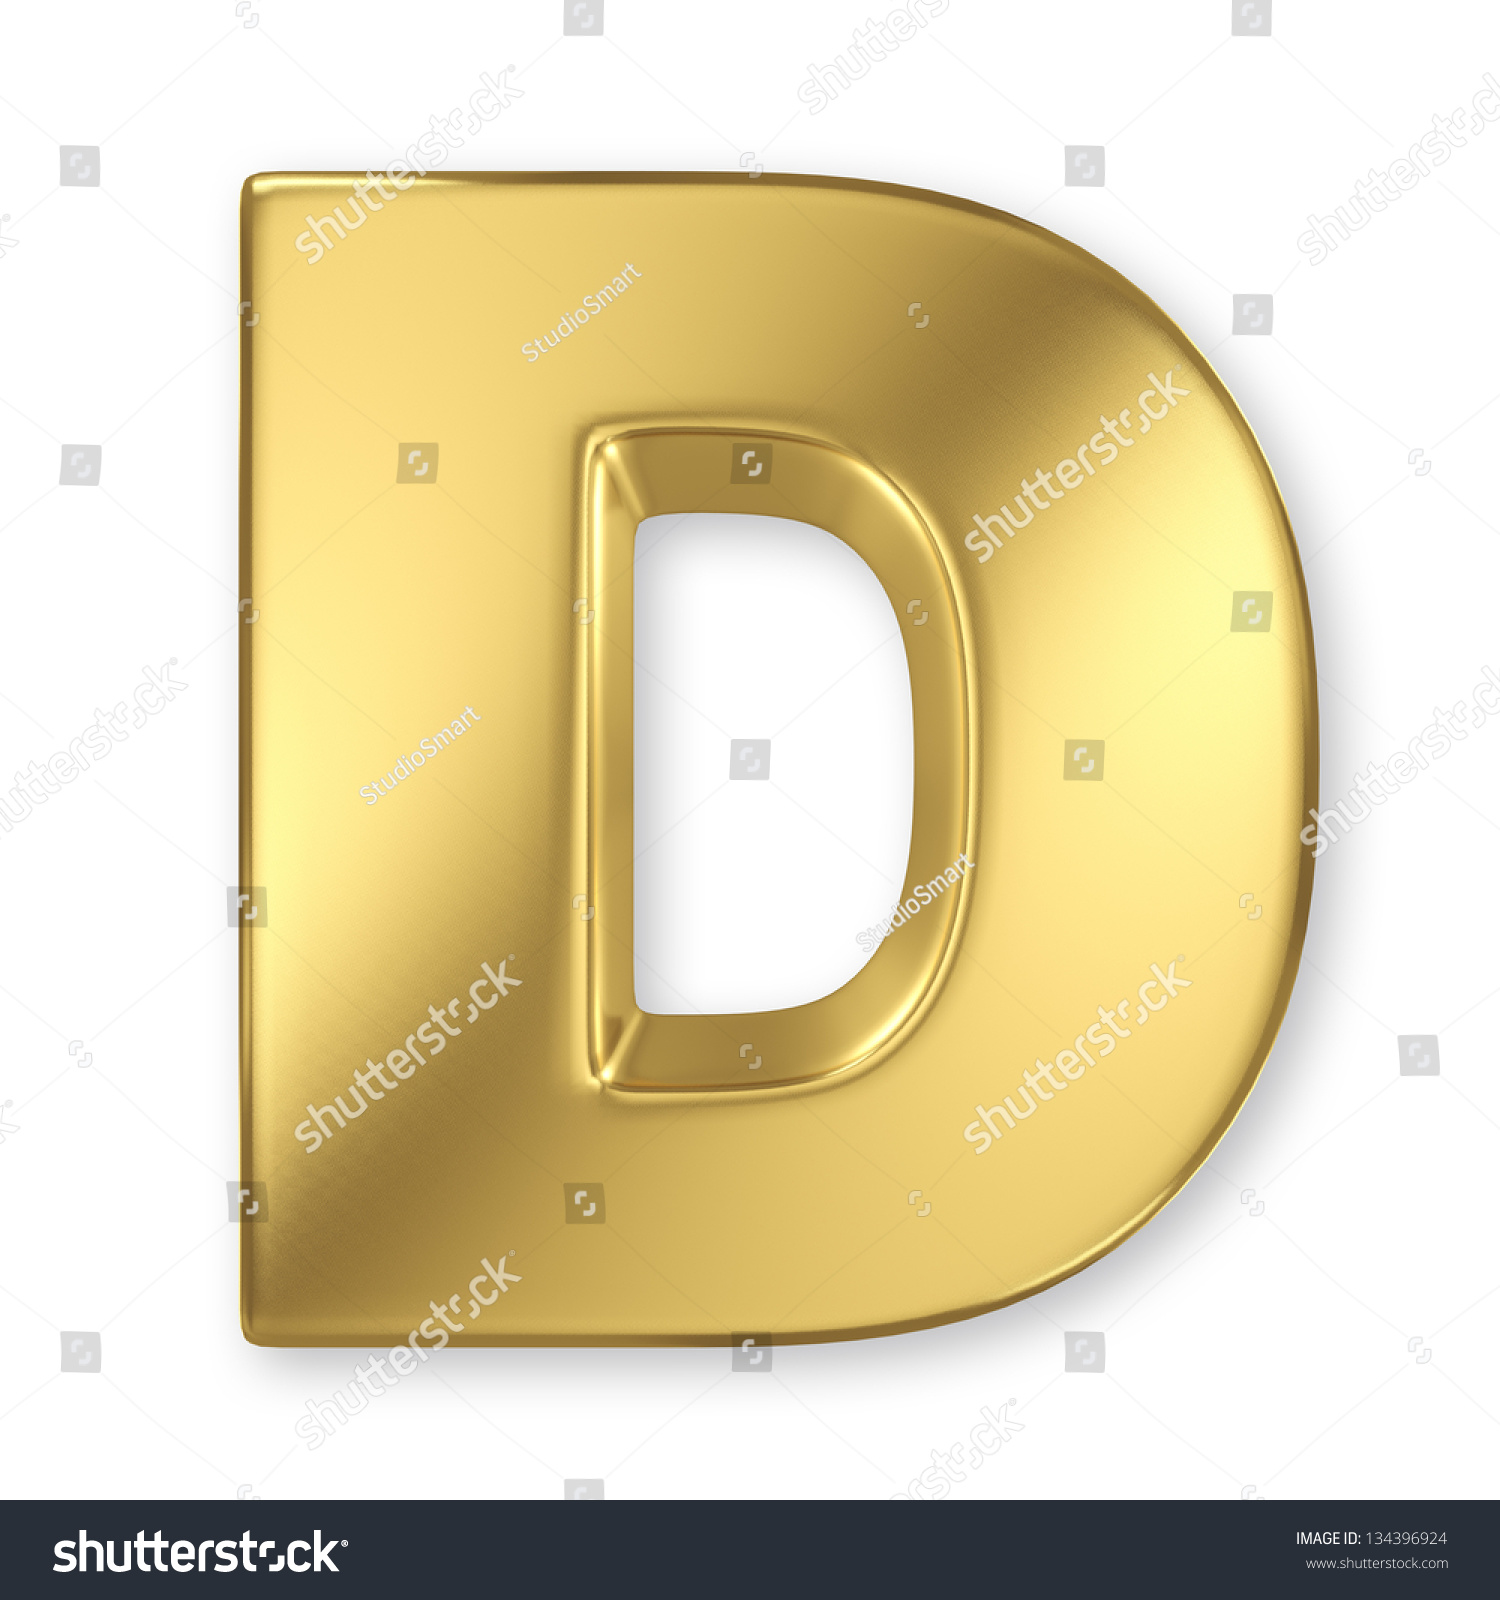 Letter D From Gold Solid Alphabet Stock Photo 134396924 : Shutterstock